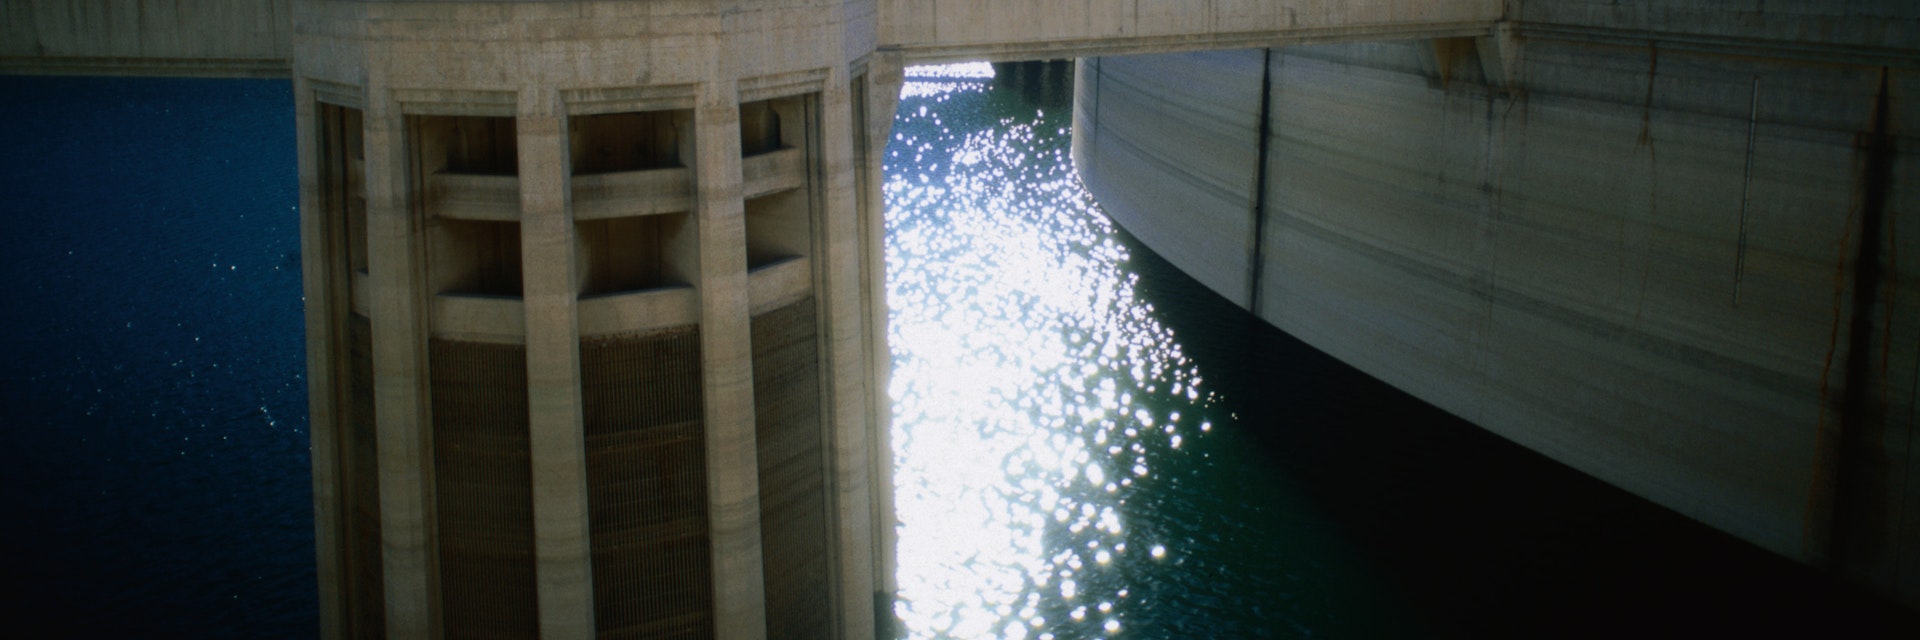 Hoover Dam.
16133-95
Las Vegas, Nevada, North America, United States, architecture, concrete, dam, energy industry, industry, power, structure, wall, water